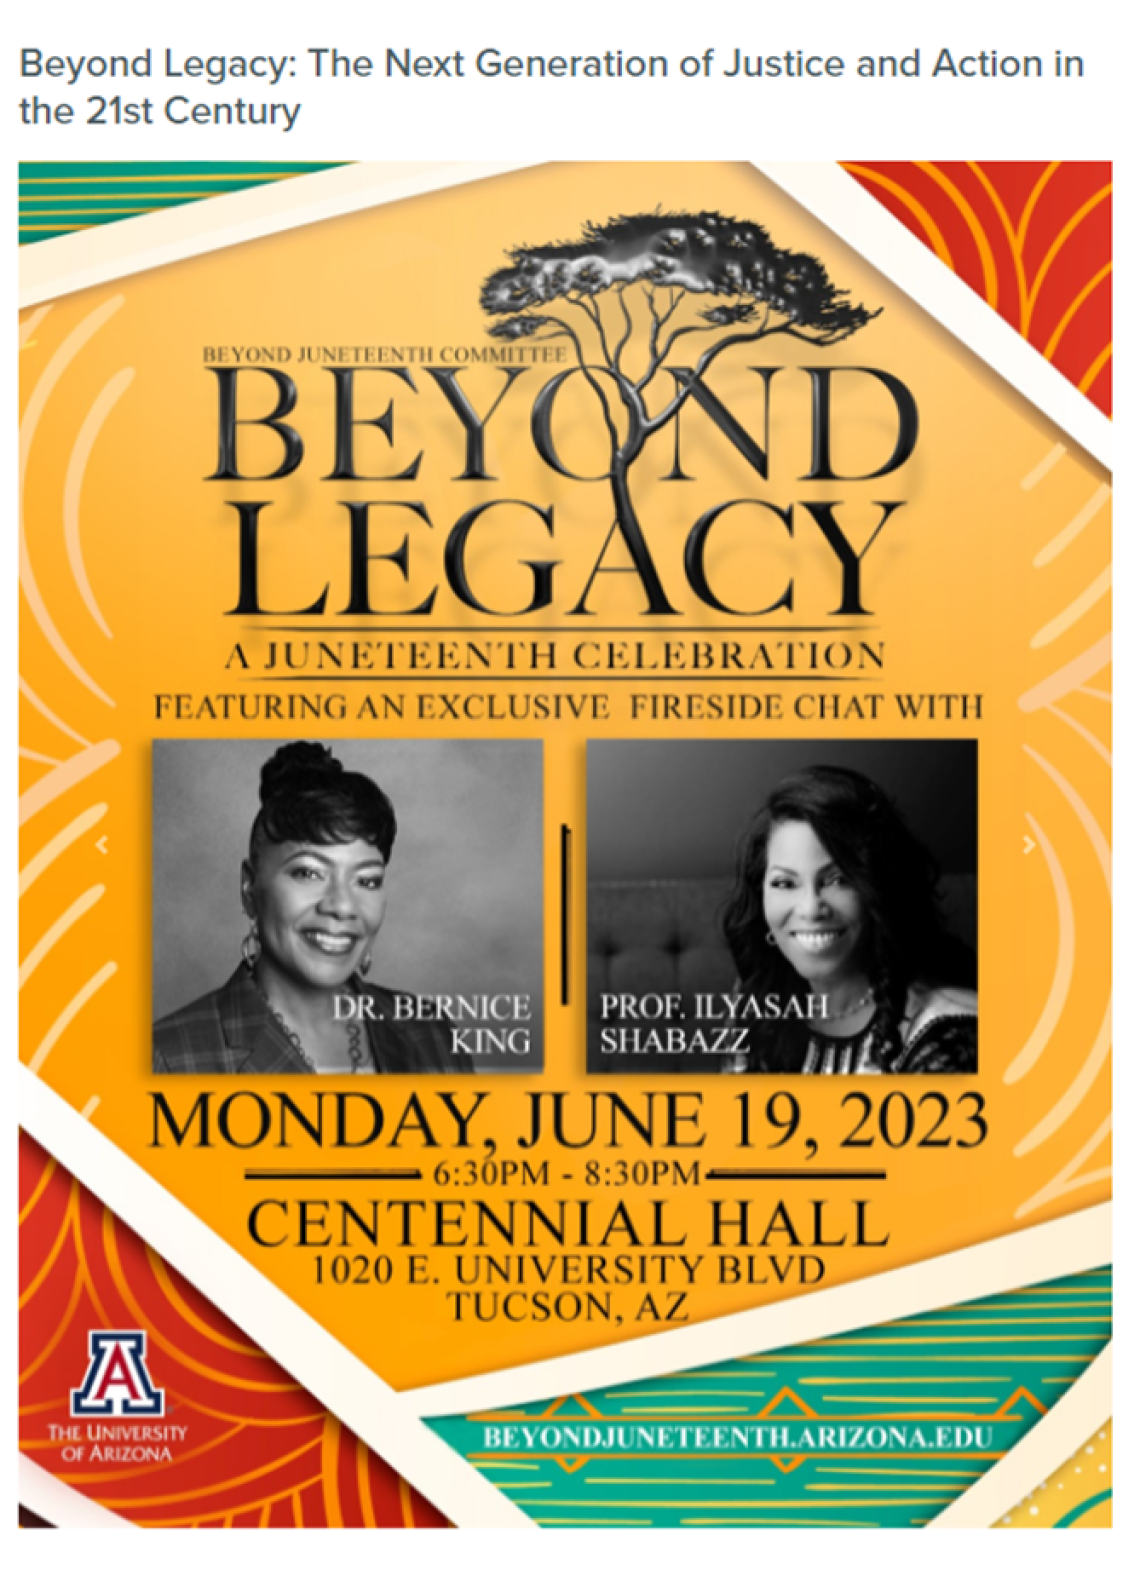 juneteenth celebration  Beyond Legacy: Justice & Action in the 21st Century